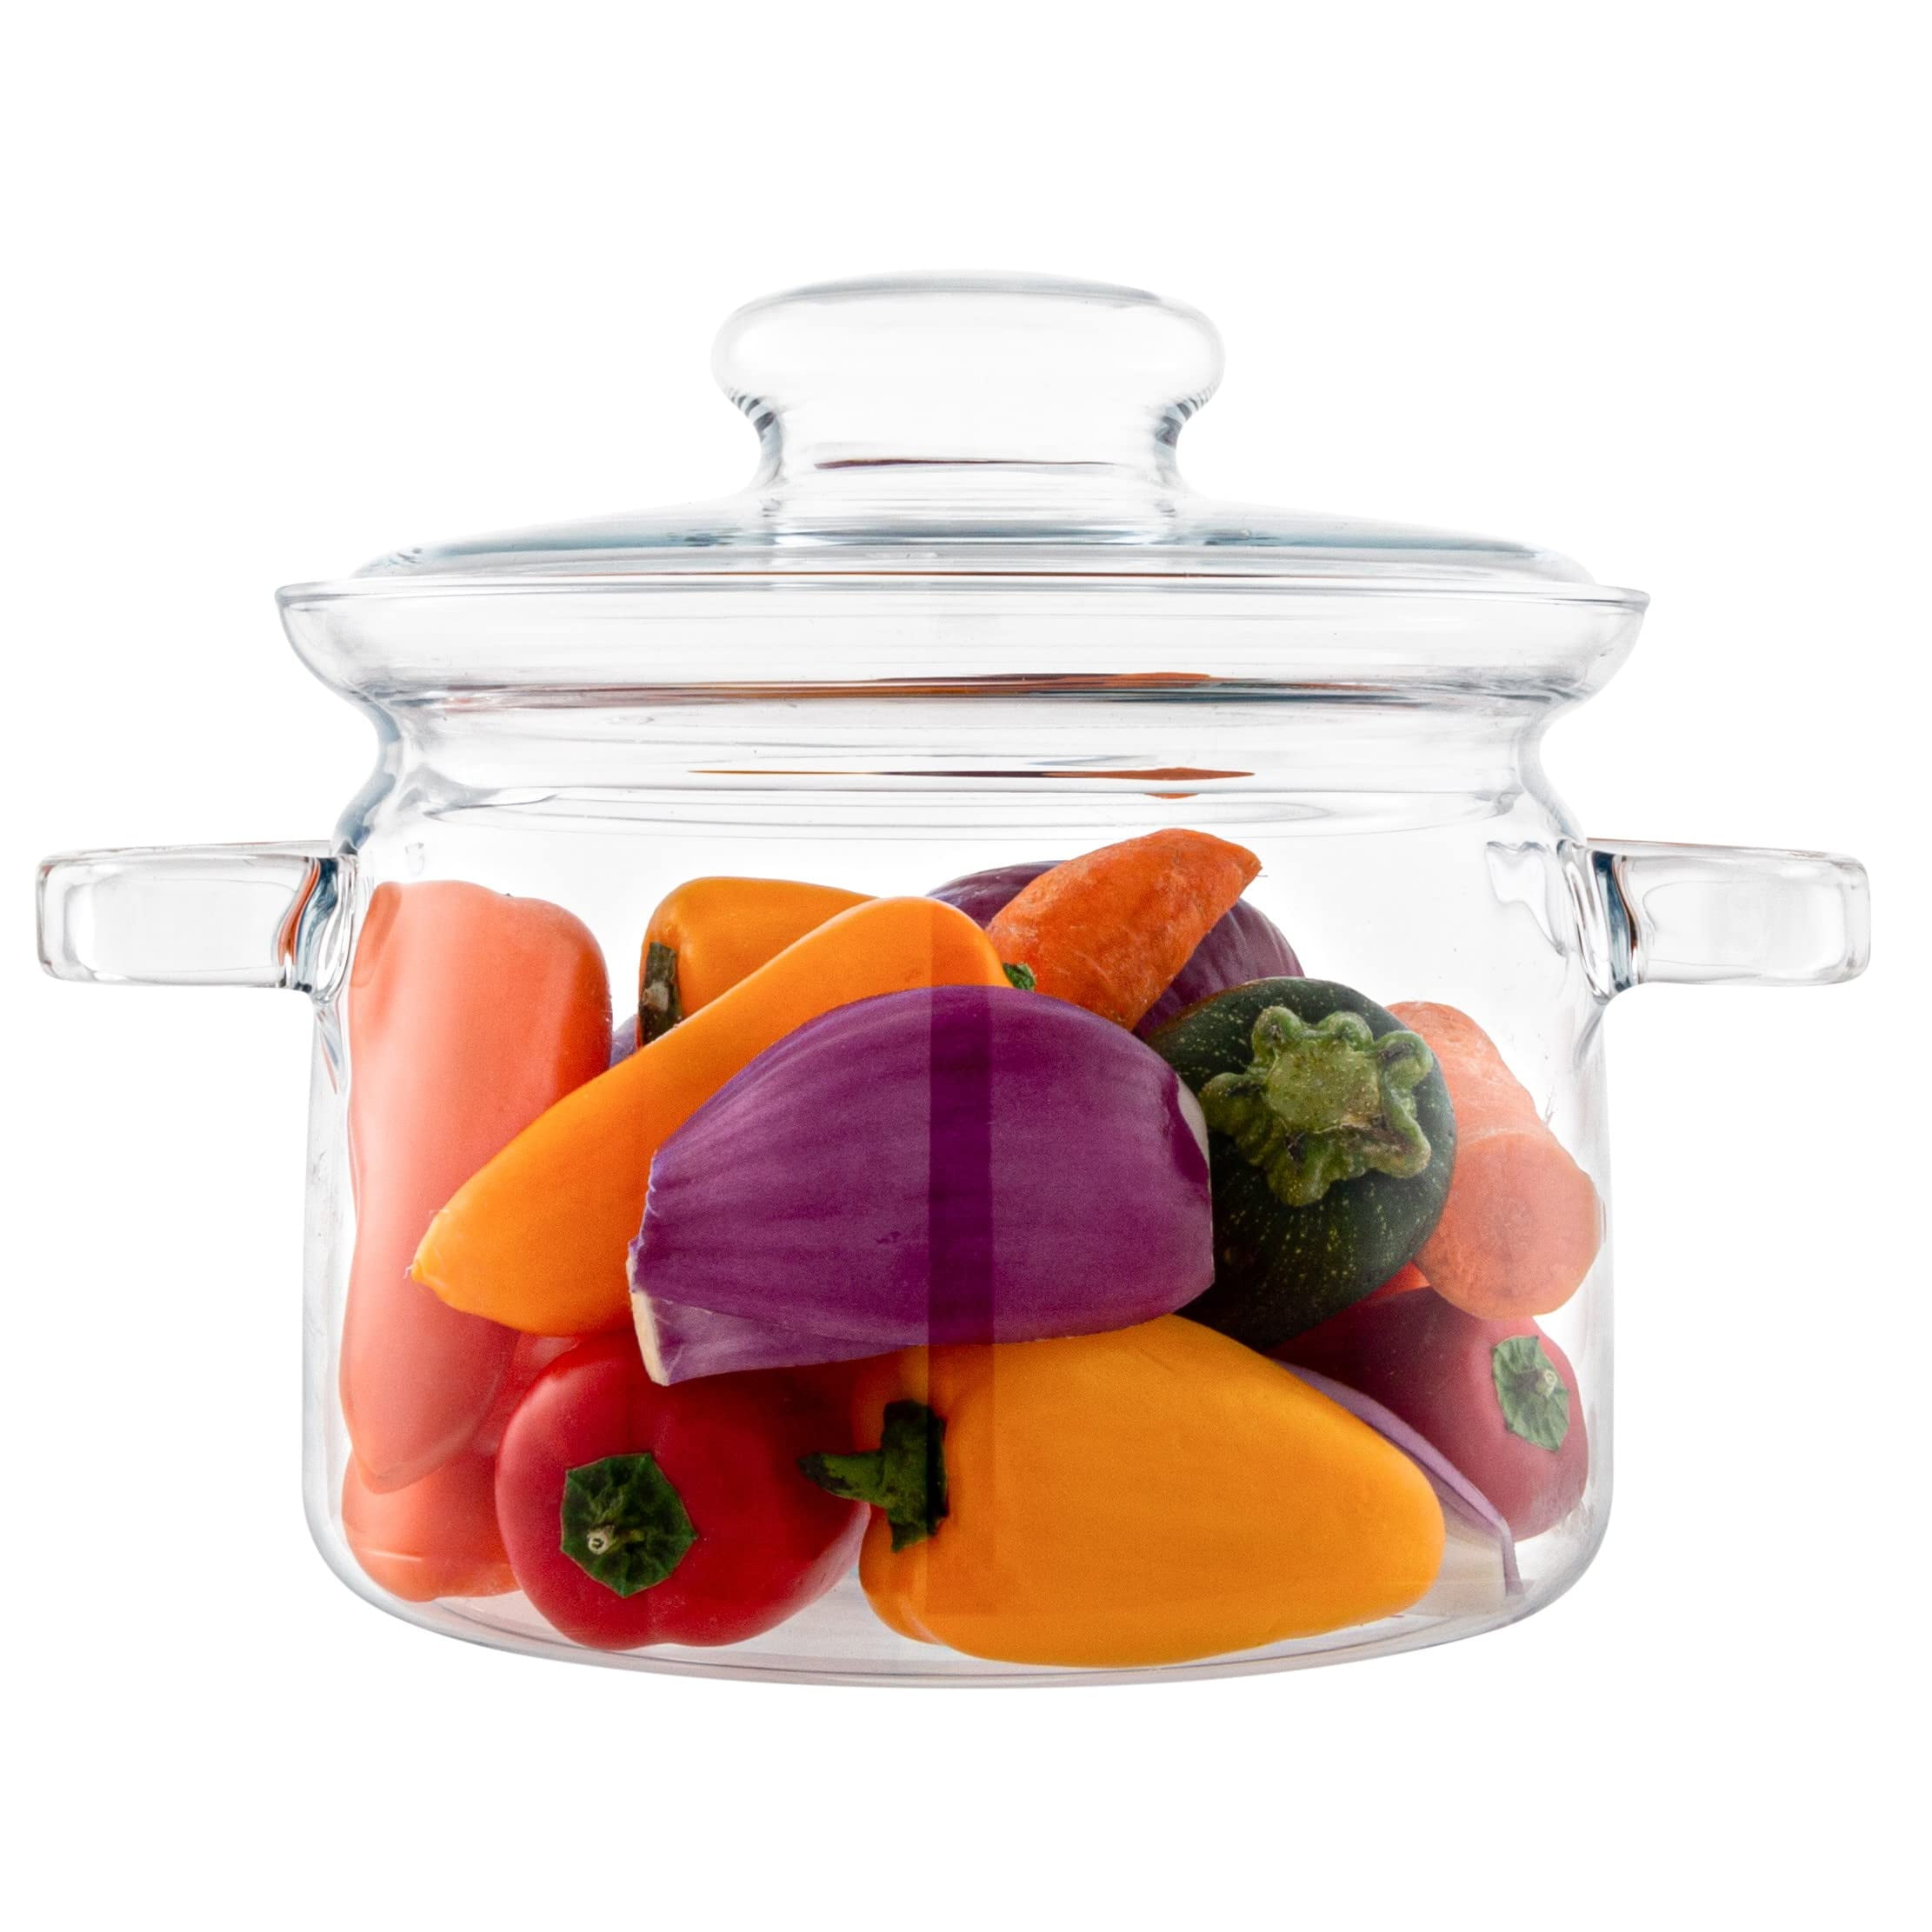 Glass Saucepan 2.0 Liter - Heat Resistant Glass Cooking Pot with Lid Sauce Pan for Soup, Pasta & Baby Food (2000ml/68oz)